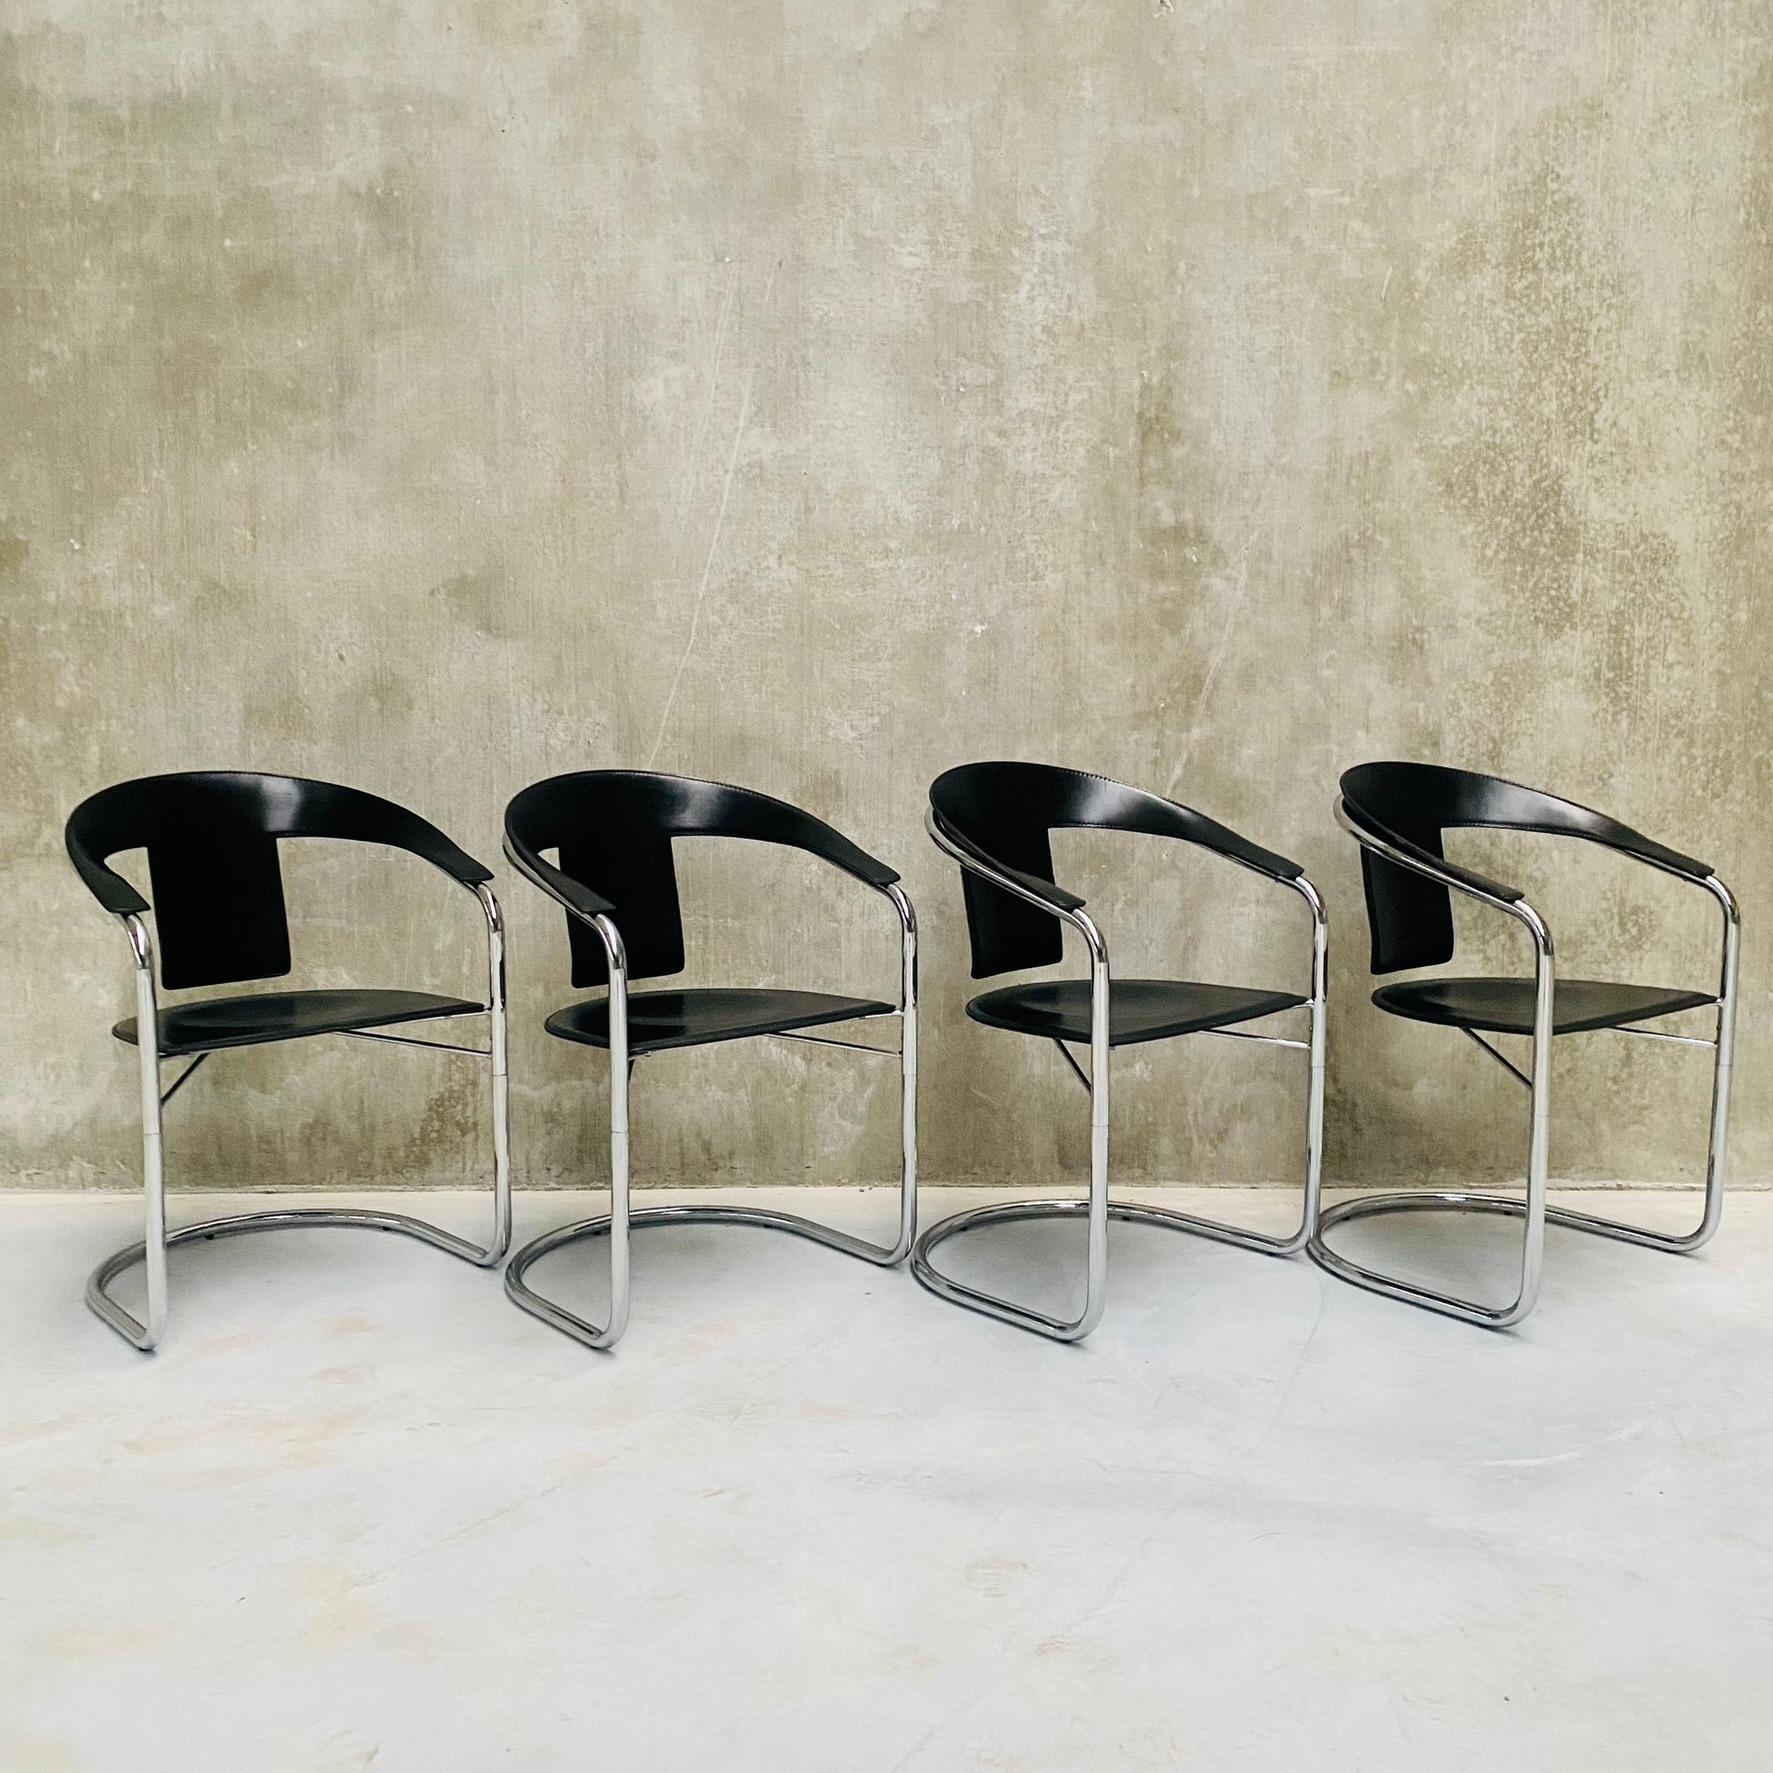 Introducing the stunning set of 4 black saddle leather and chrome frame dining chairs by A. RIZZATTO for LO STUDIO, a testament to exceptional Italian design from 1980.

Crafted with meticulous attention to detail, these dining chairs exude